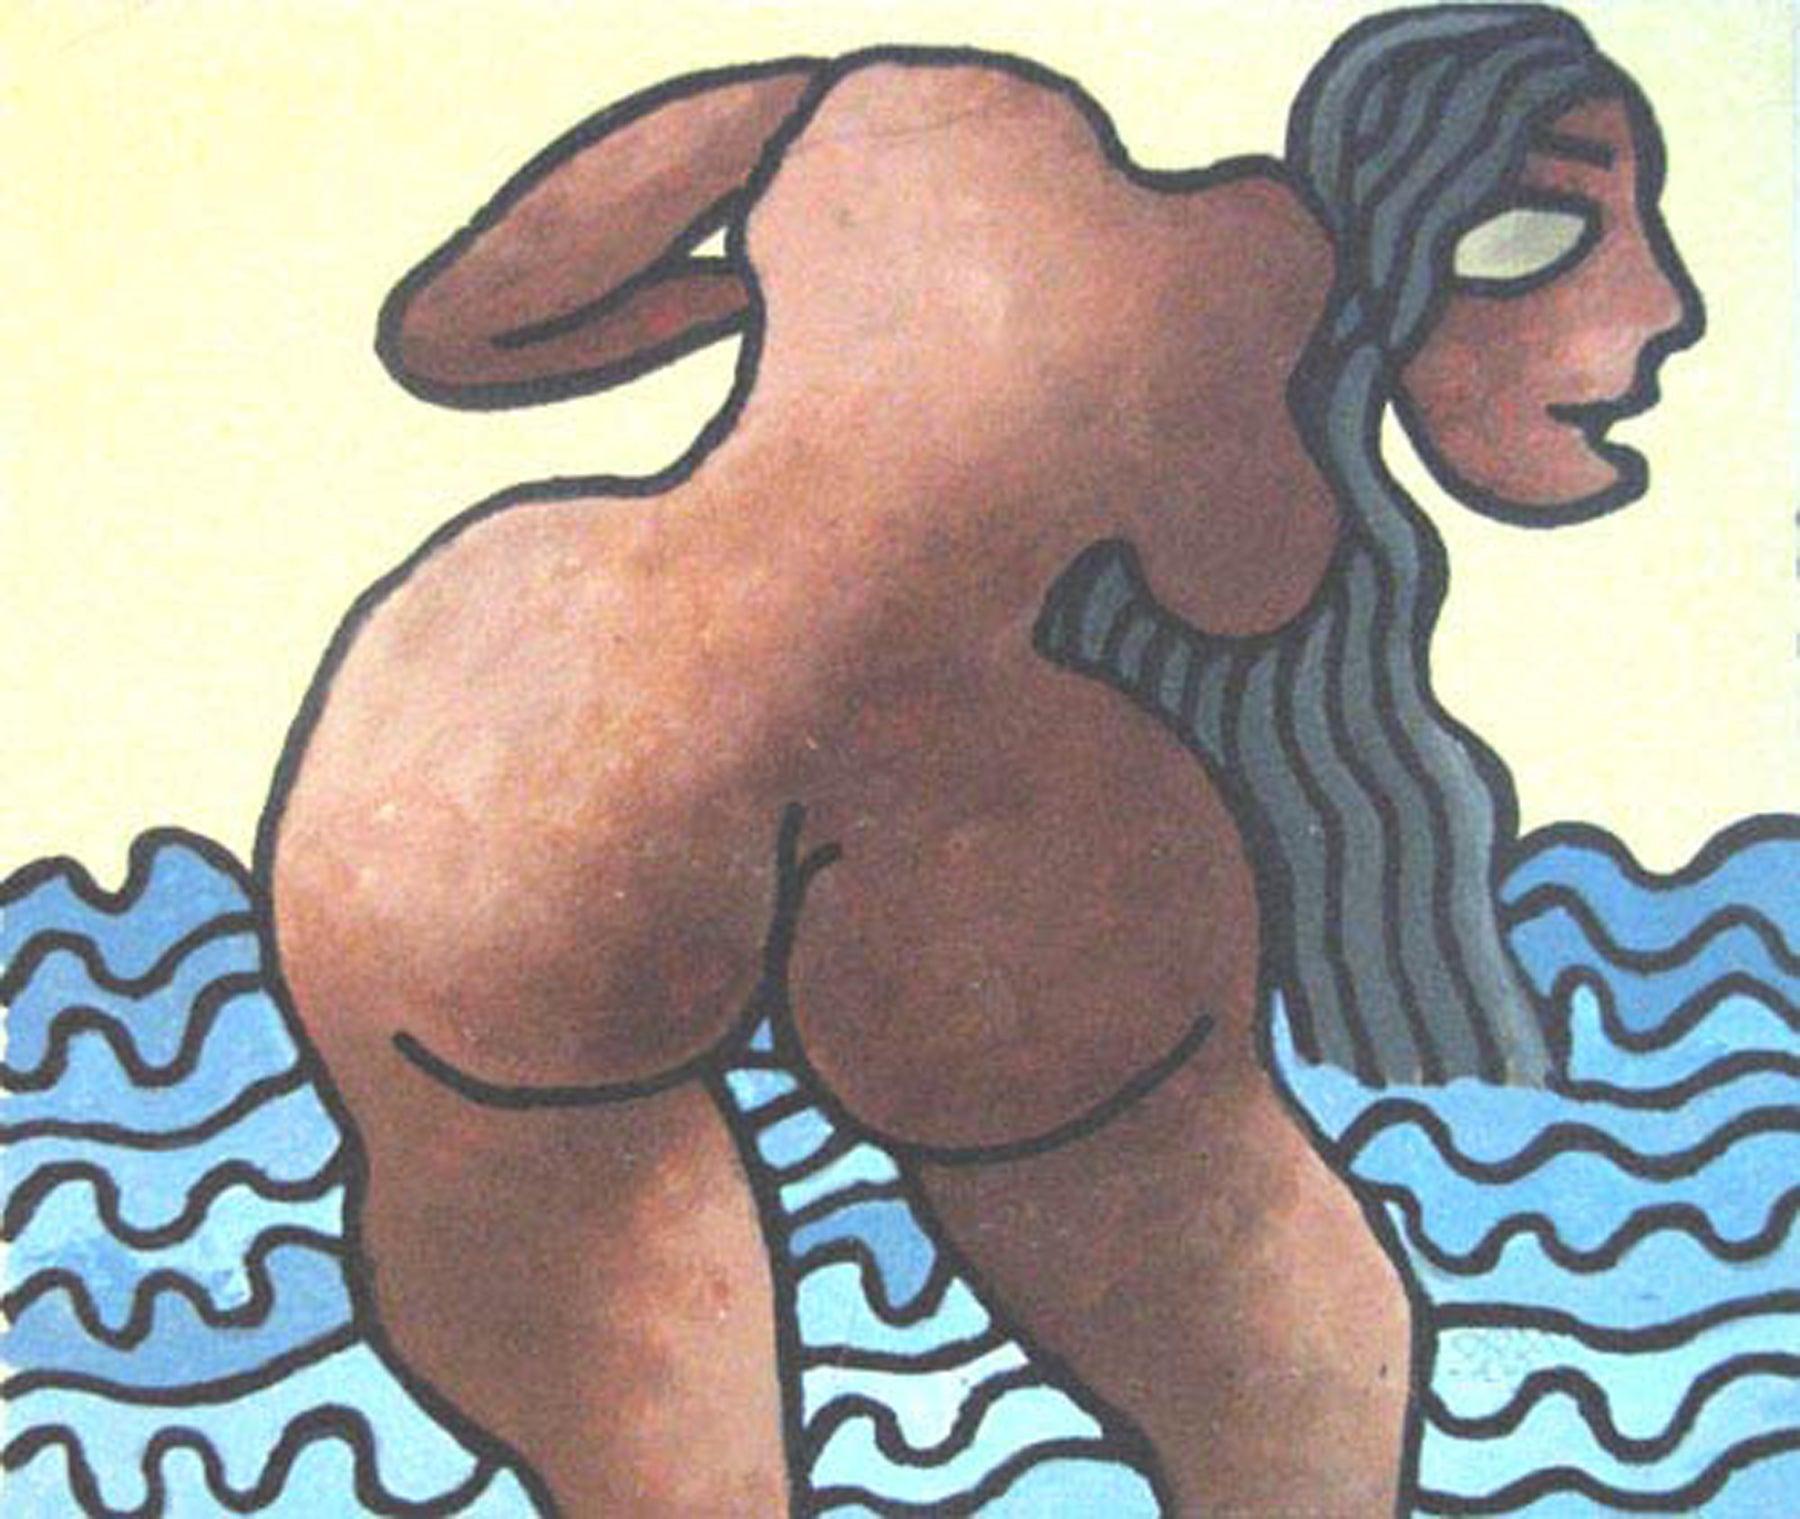 Beach Series, Nude Women, Mixed Media on paper by Master Indian Artist"In Stock" - Mixed Media Art by Prokash Karmakar